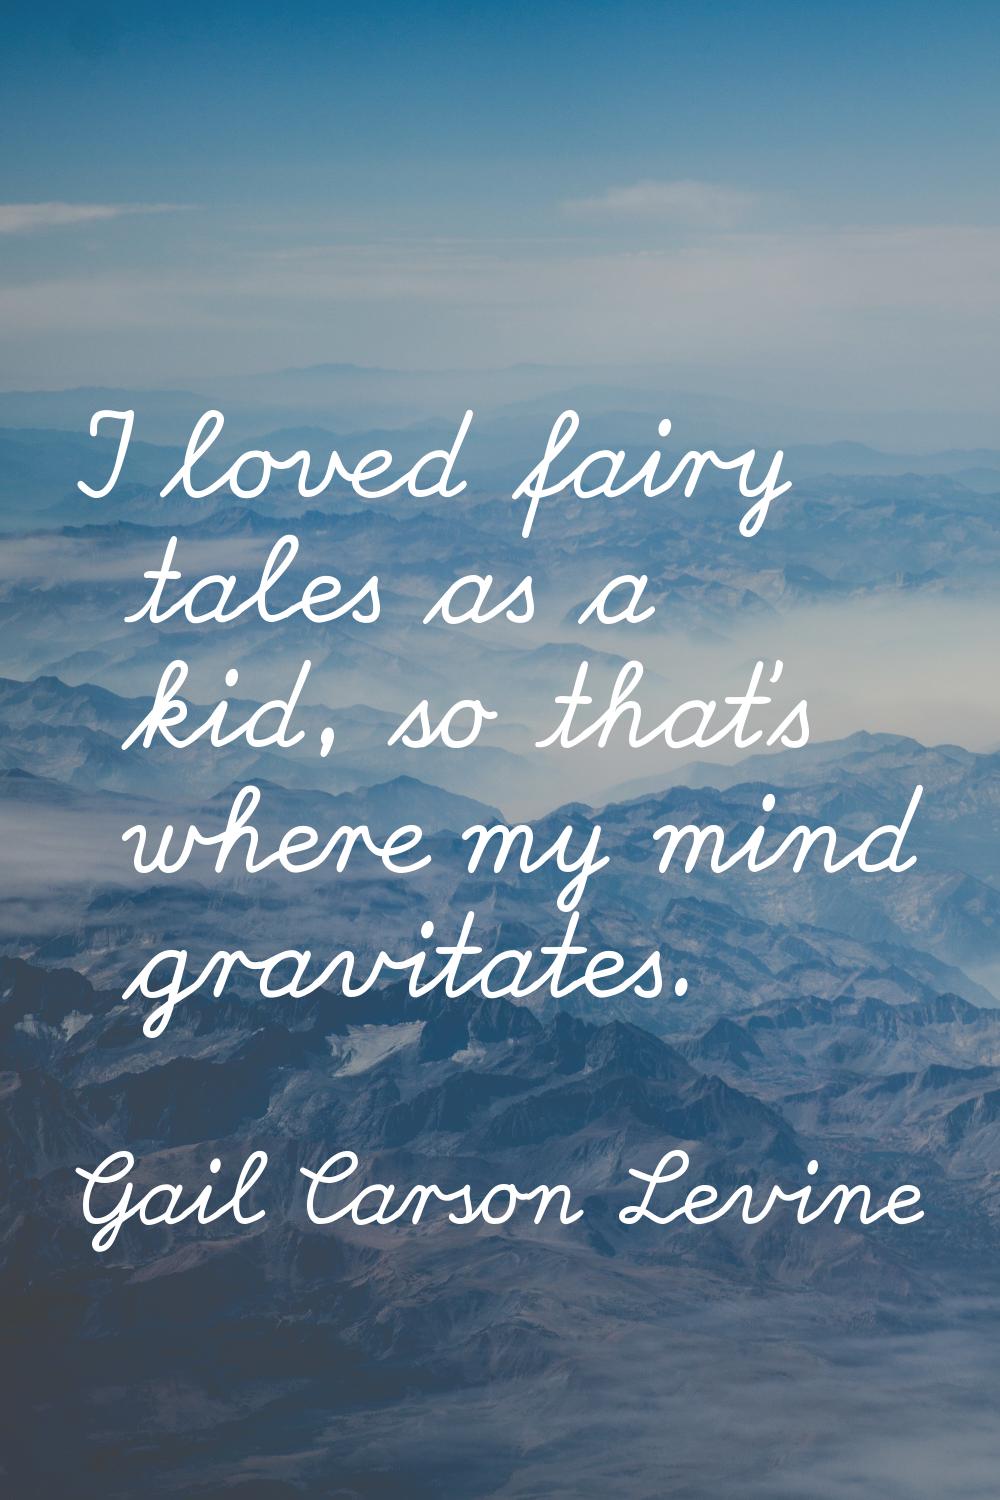 I loved fairy tales as a kid, so that's where my mind gravitates.